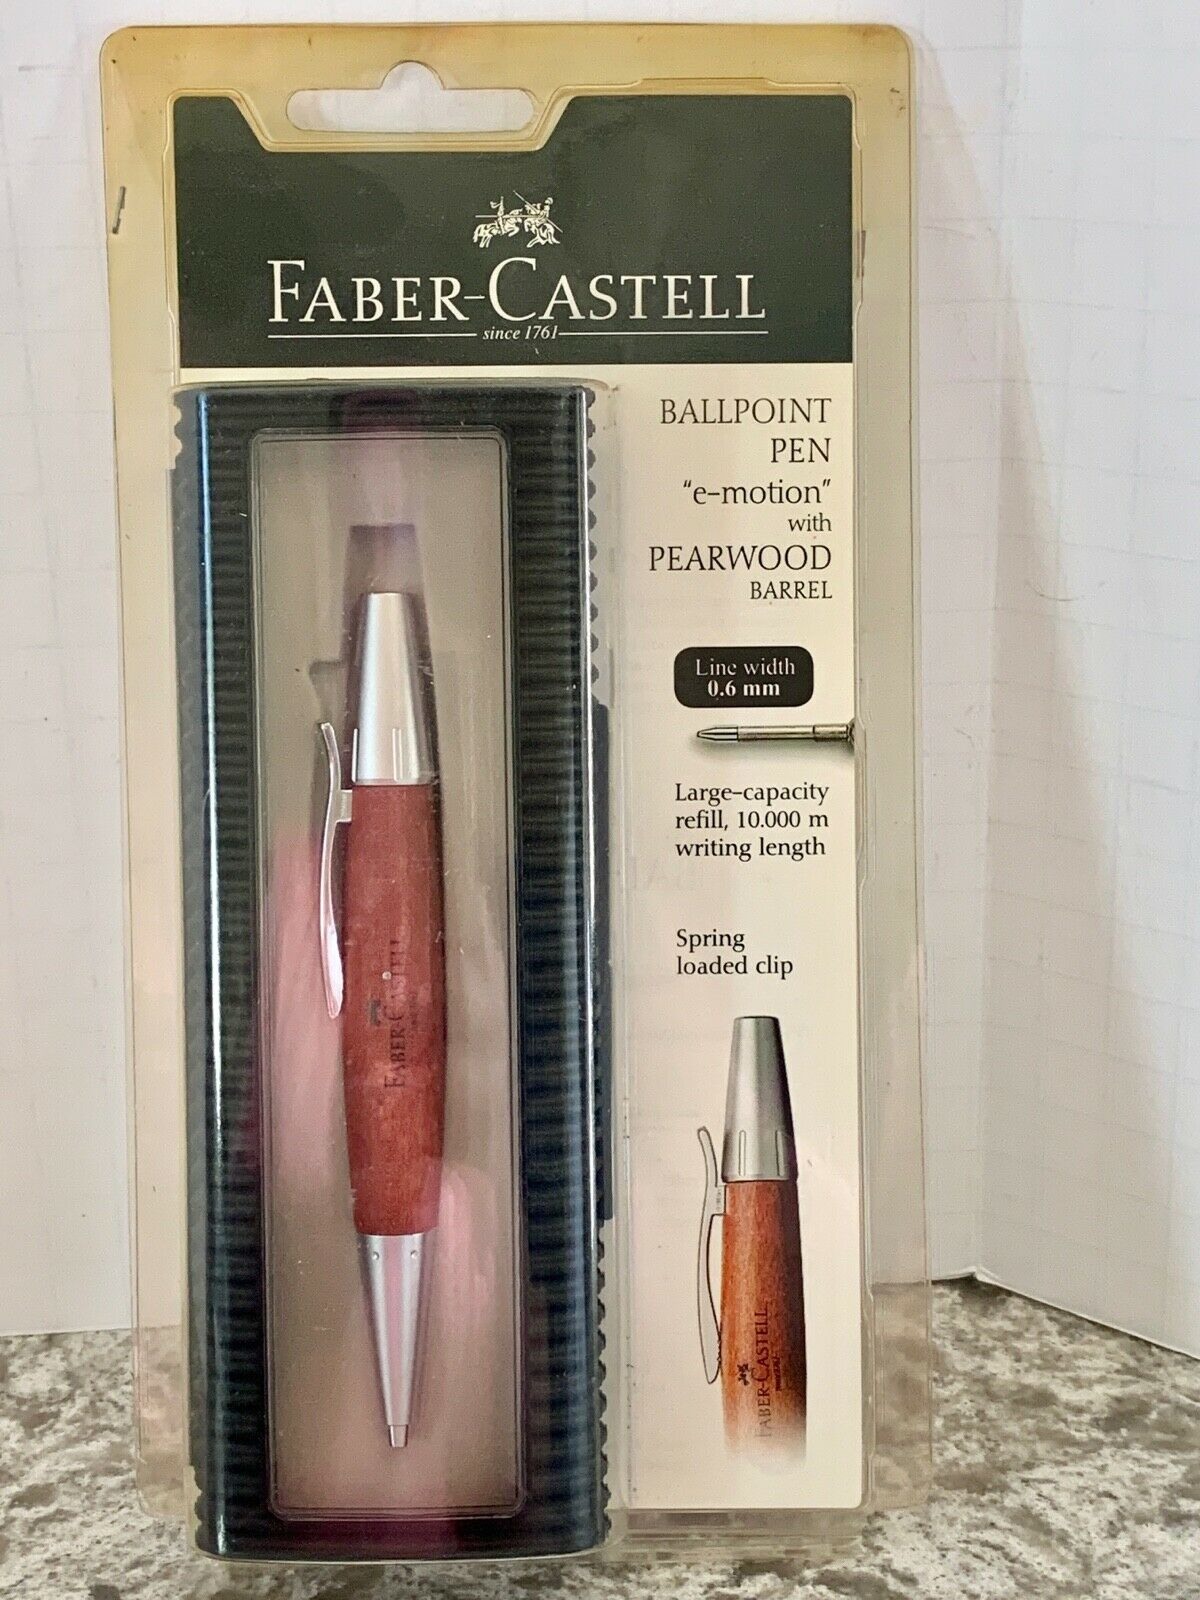 Faber-castell E Motion With Pearwood Barrel Ballpoint Pen In Package Unopened